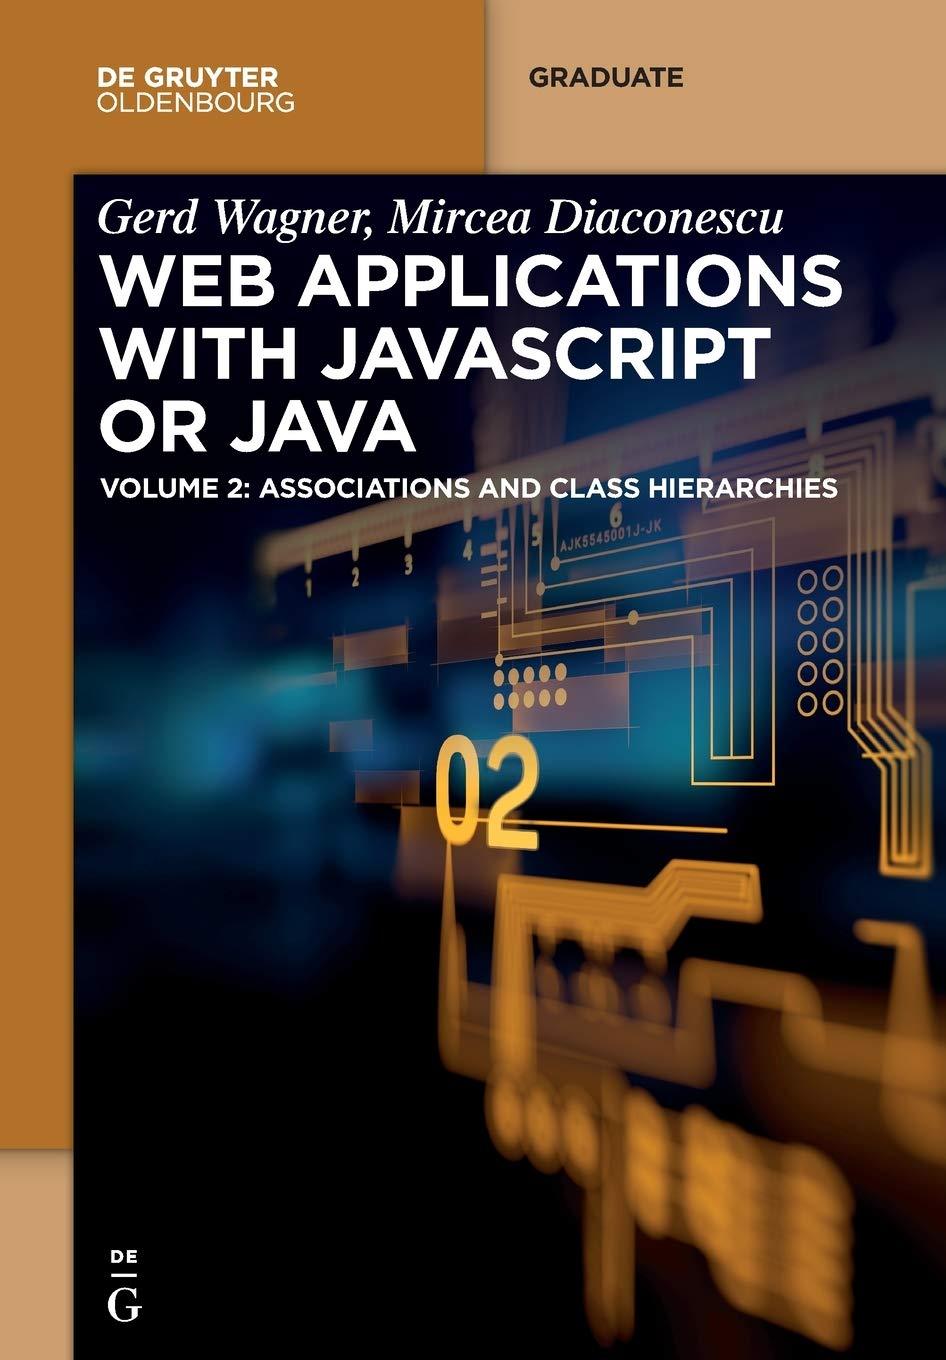 web applications with javascript or java volume 2 associations and class hierarchies 1st edition gerd wagner,